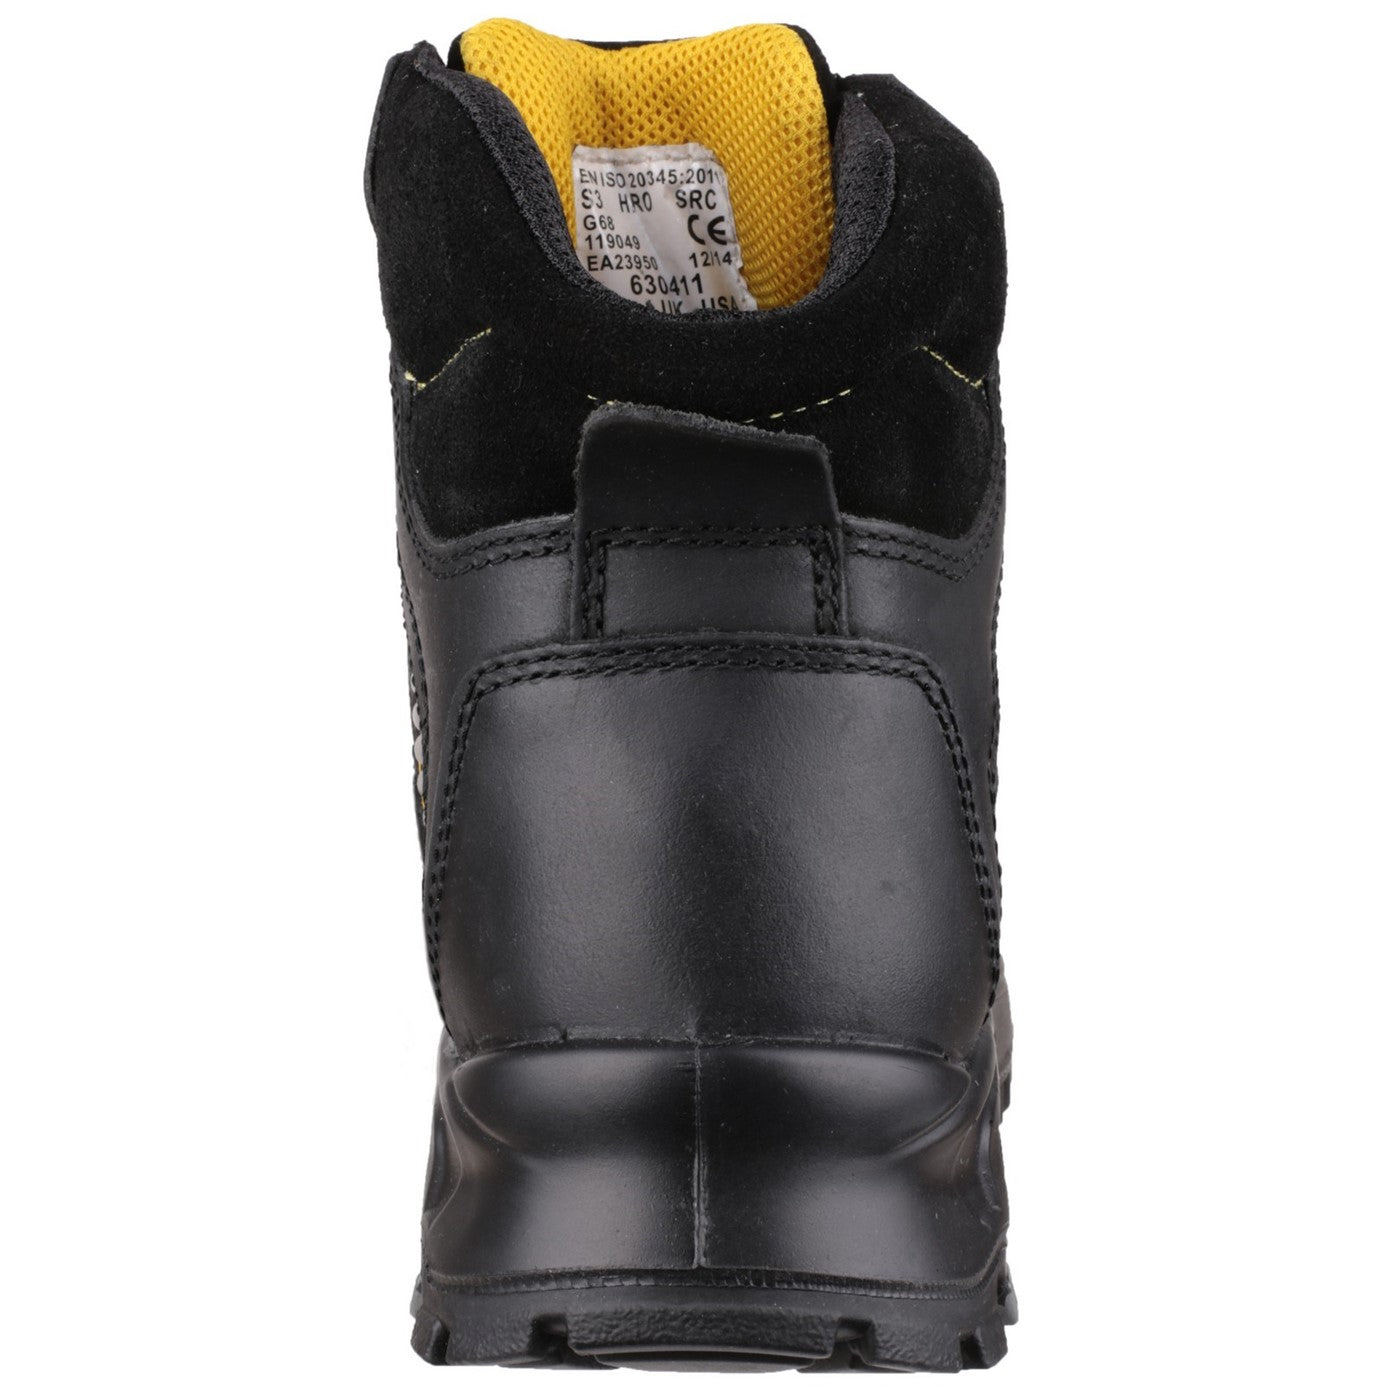 Men's Puma Safety Borneo Mid S3 Safety Boot